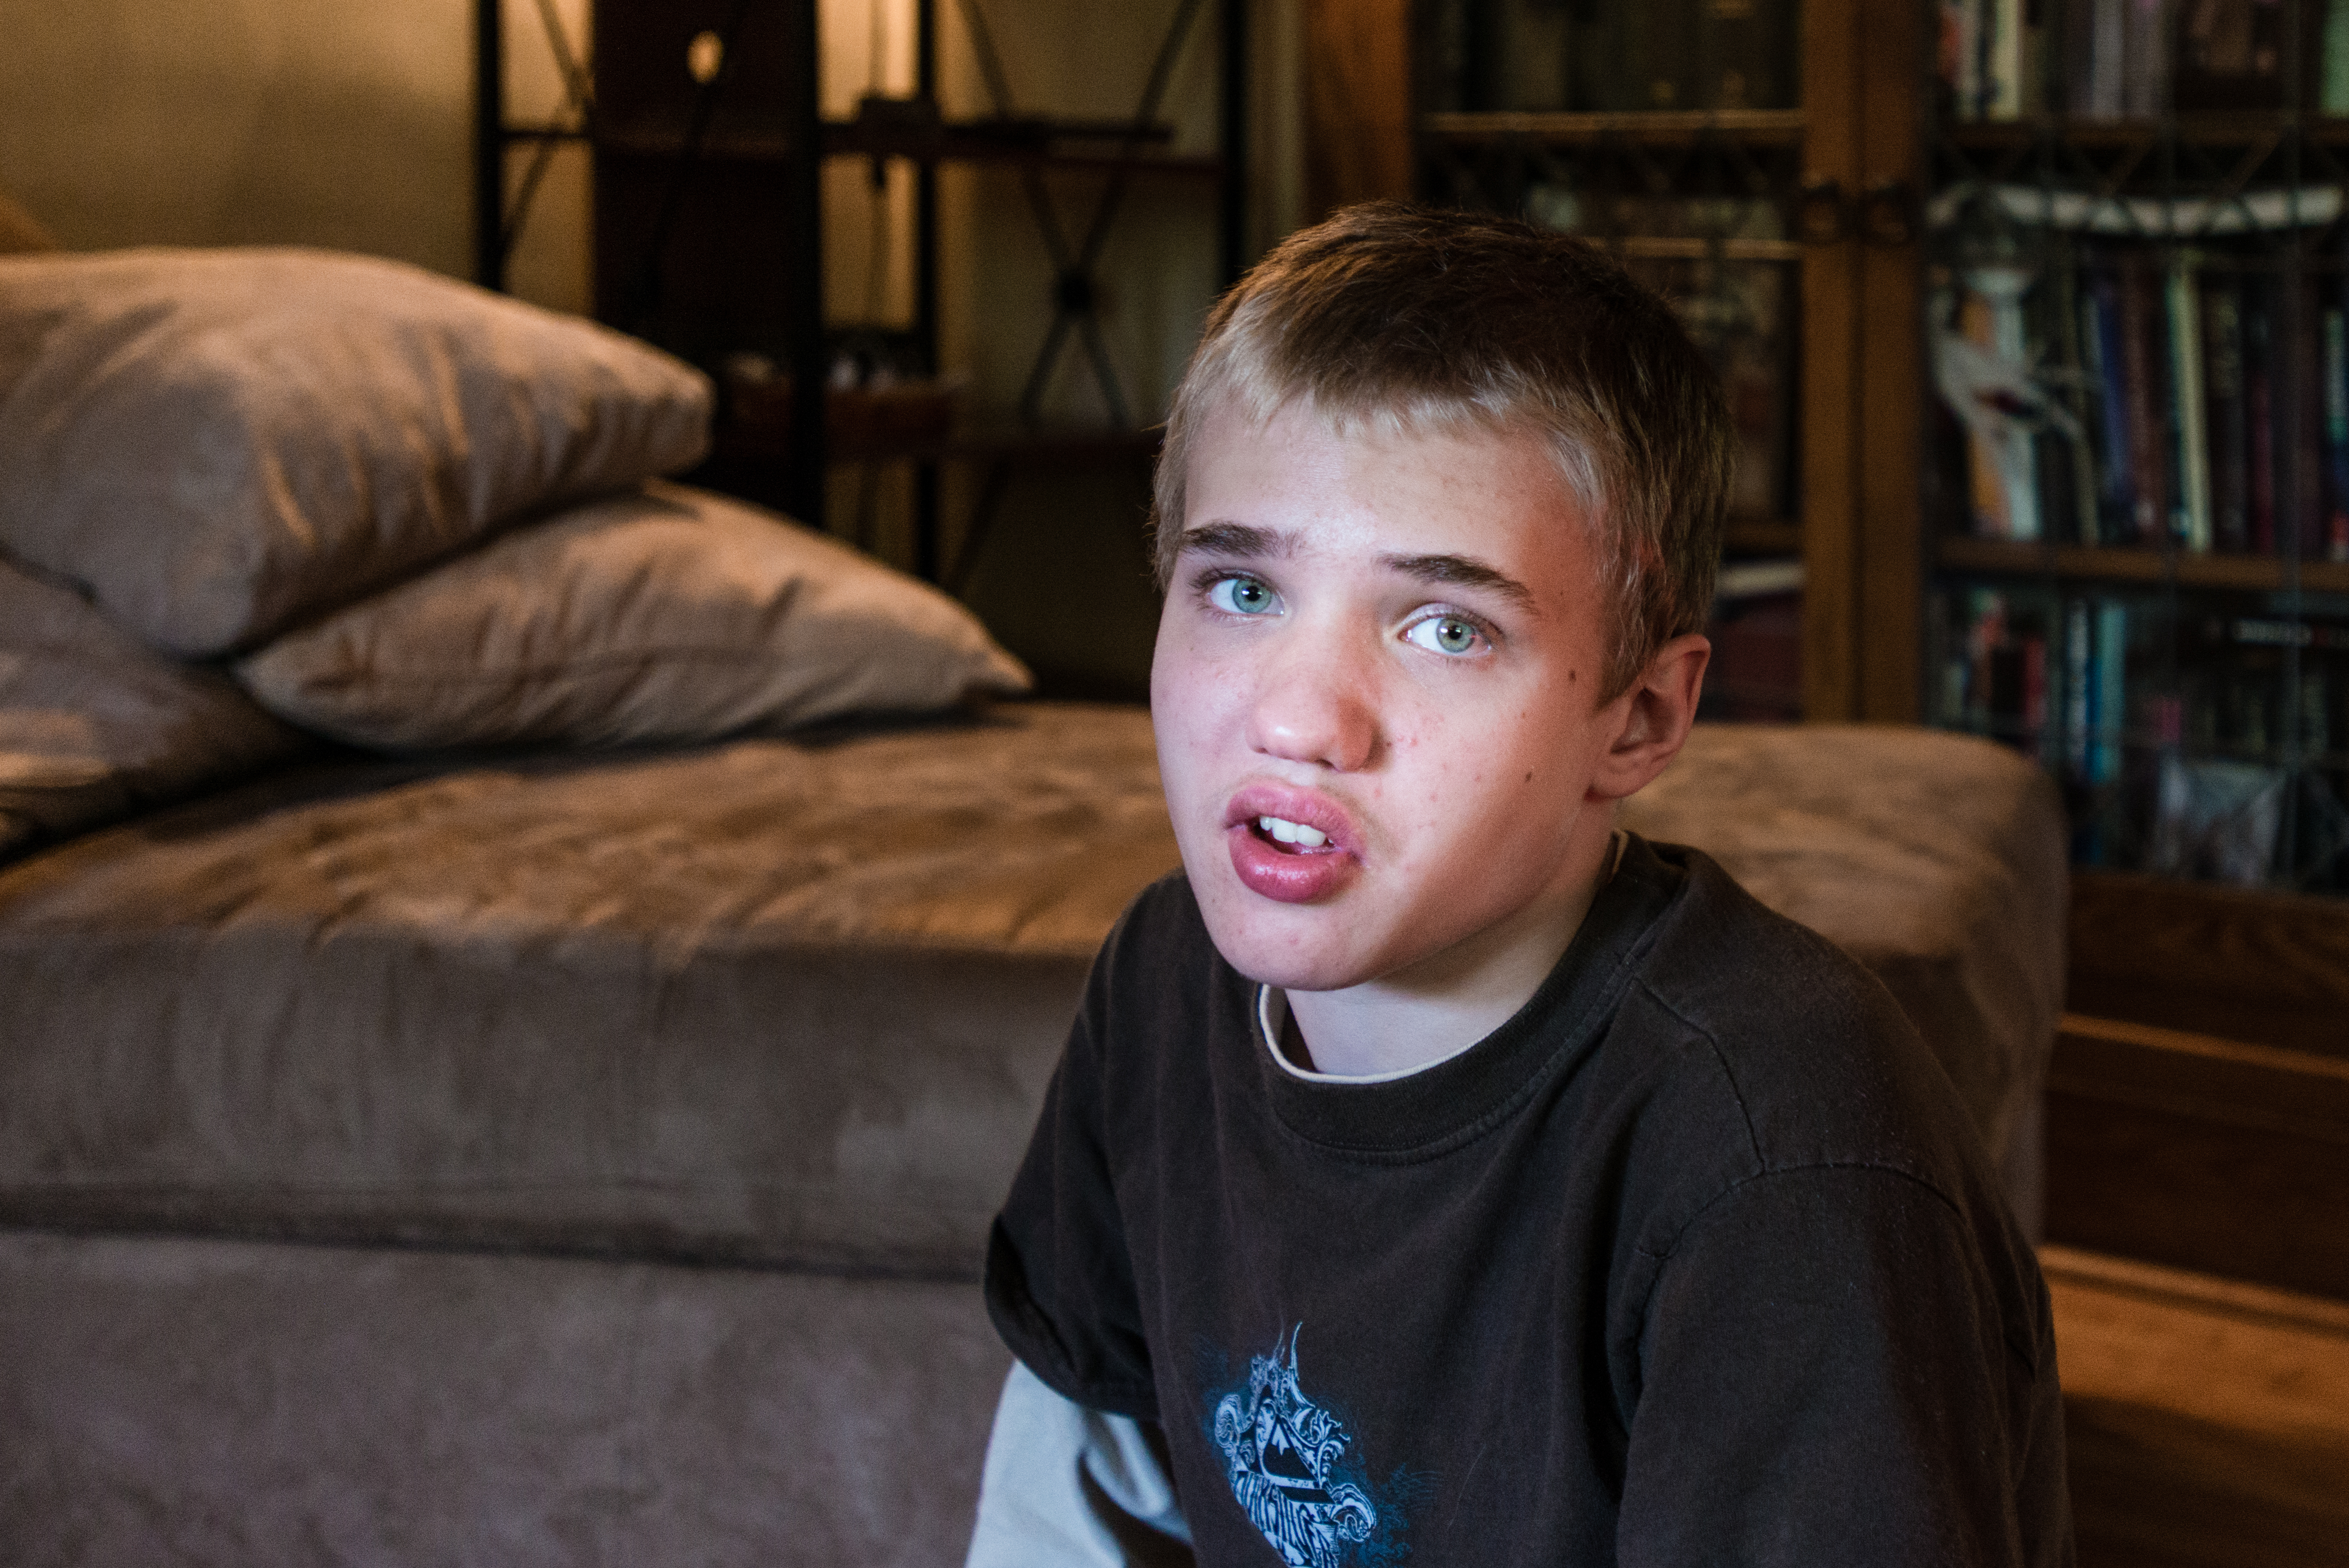 Alexander Brown, 14, sits in his living room on Thursday, May 14, 2015. He was diagnosed with autism at 18 months. Alexander is having a hard time with puberty and is lashing out physically (Photo by Heidi de Marco/KHN).